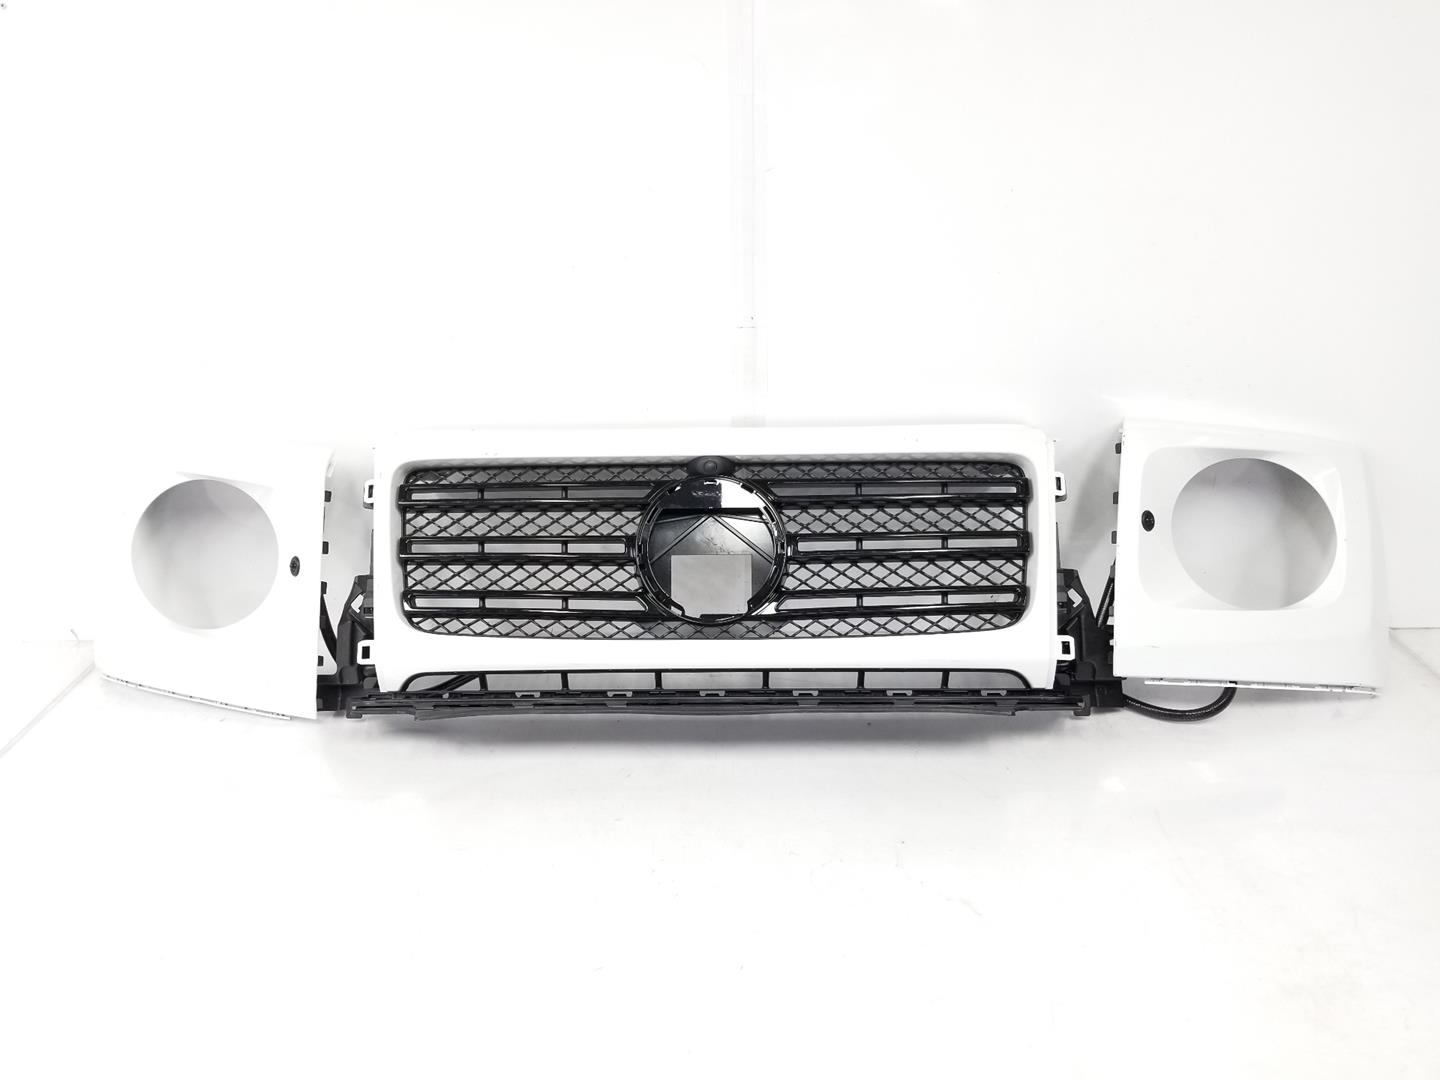 MERCEDES-BENZ G (W463) (1989-present) Radiator Grille A4638804402, A4638804202, COLORBLANCO 24133750